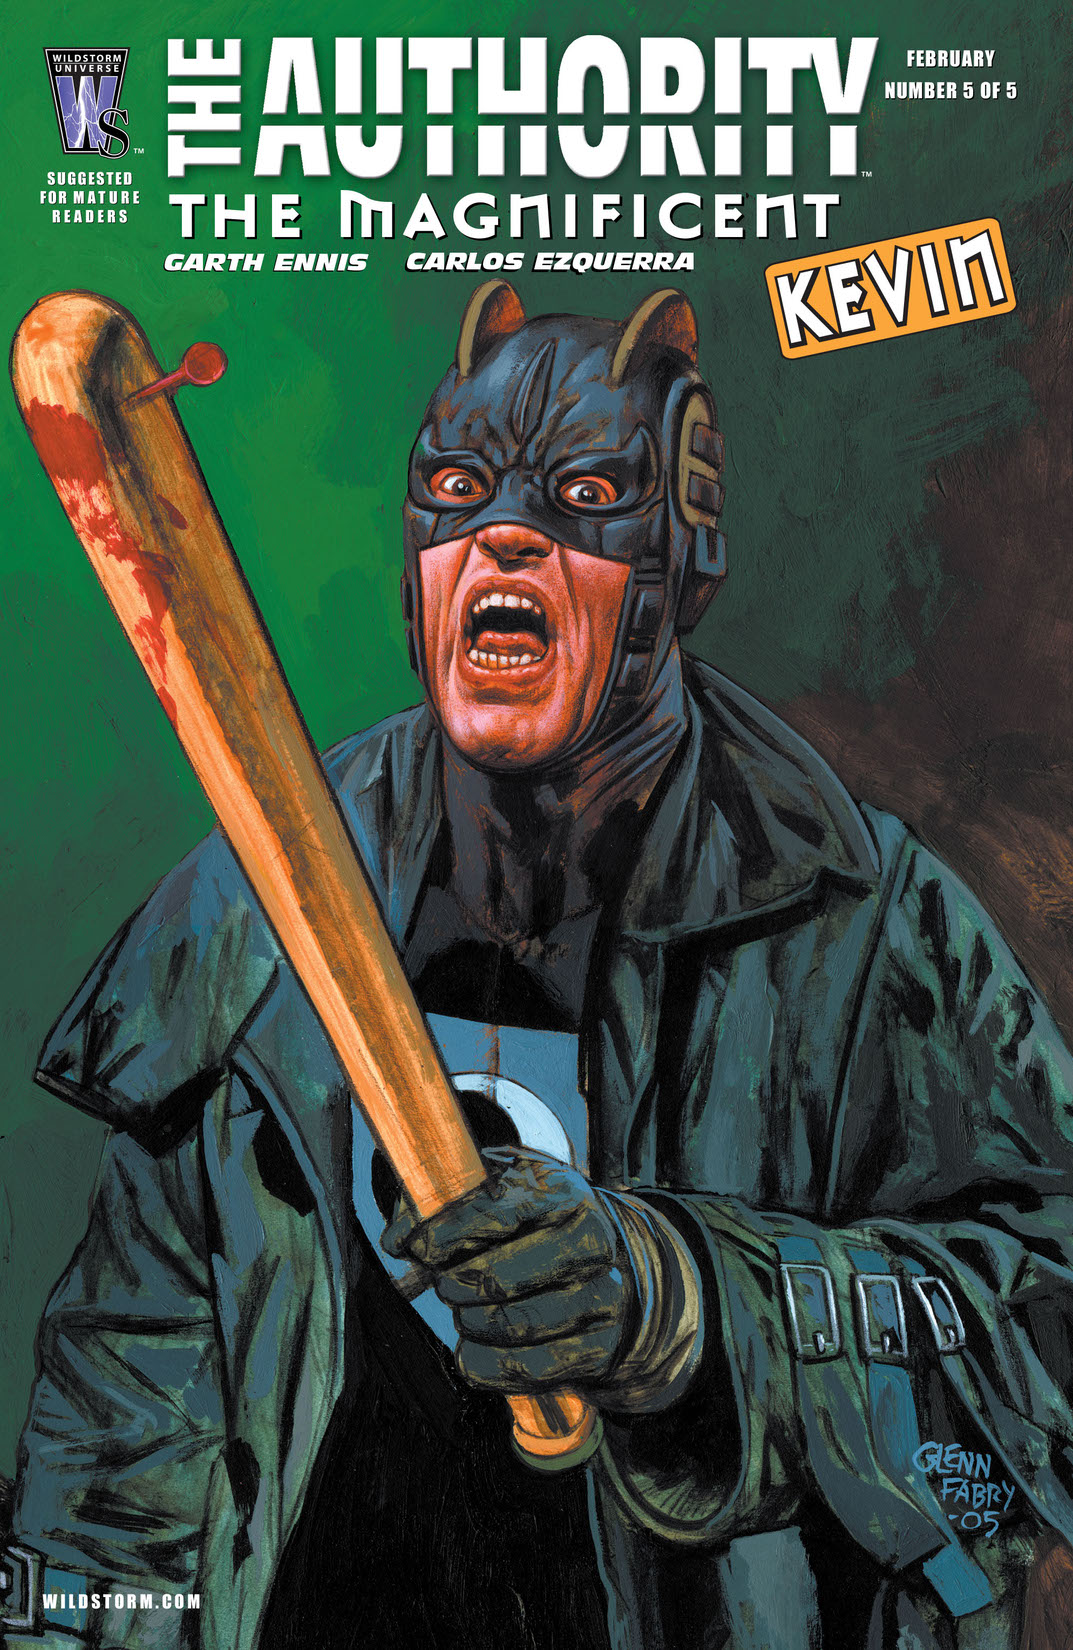 The Authority: The Magnificent Kevin #5 preview images